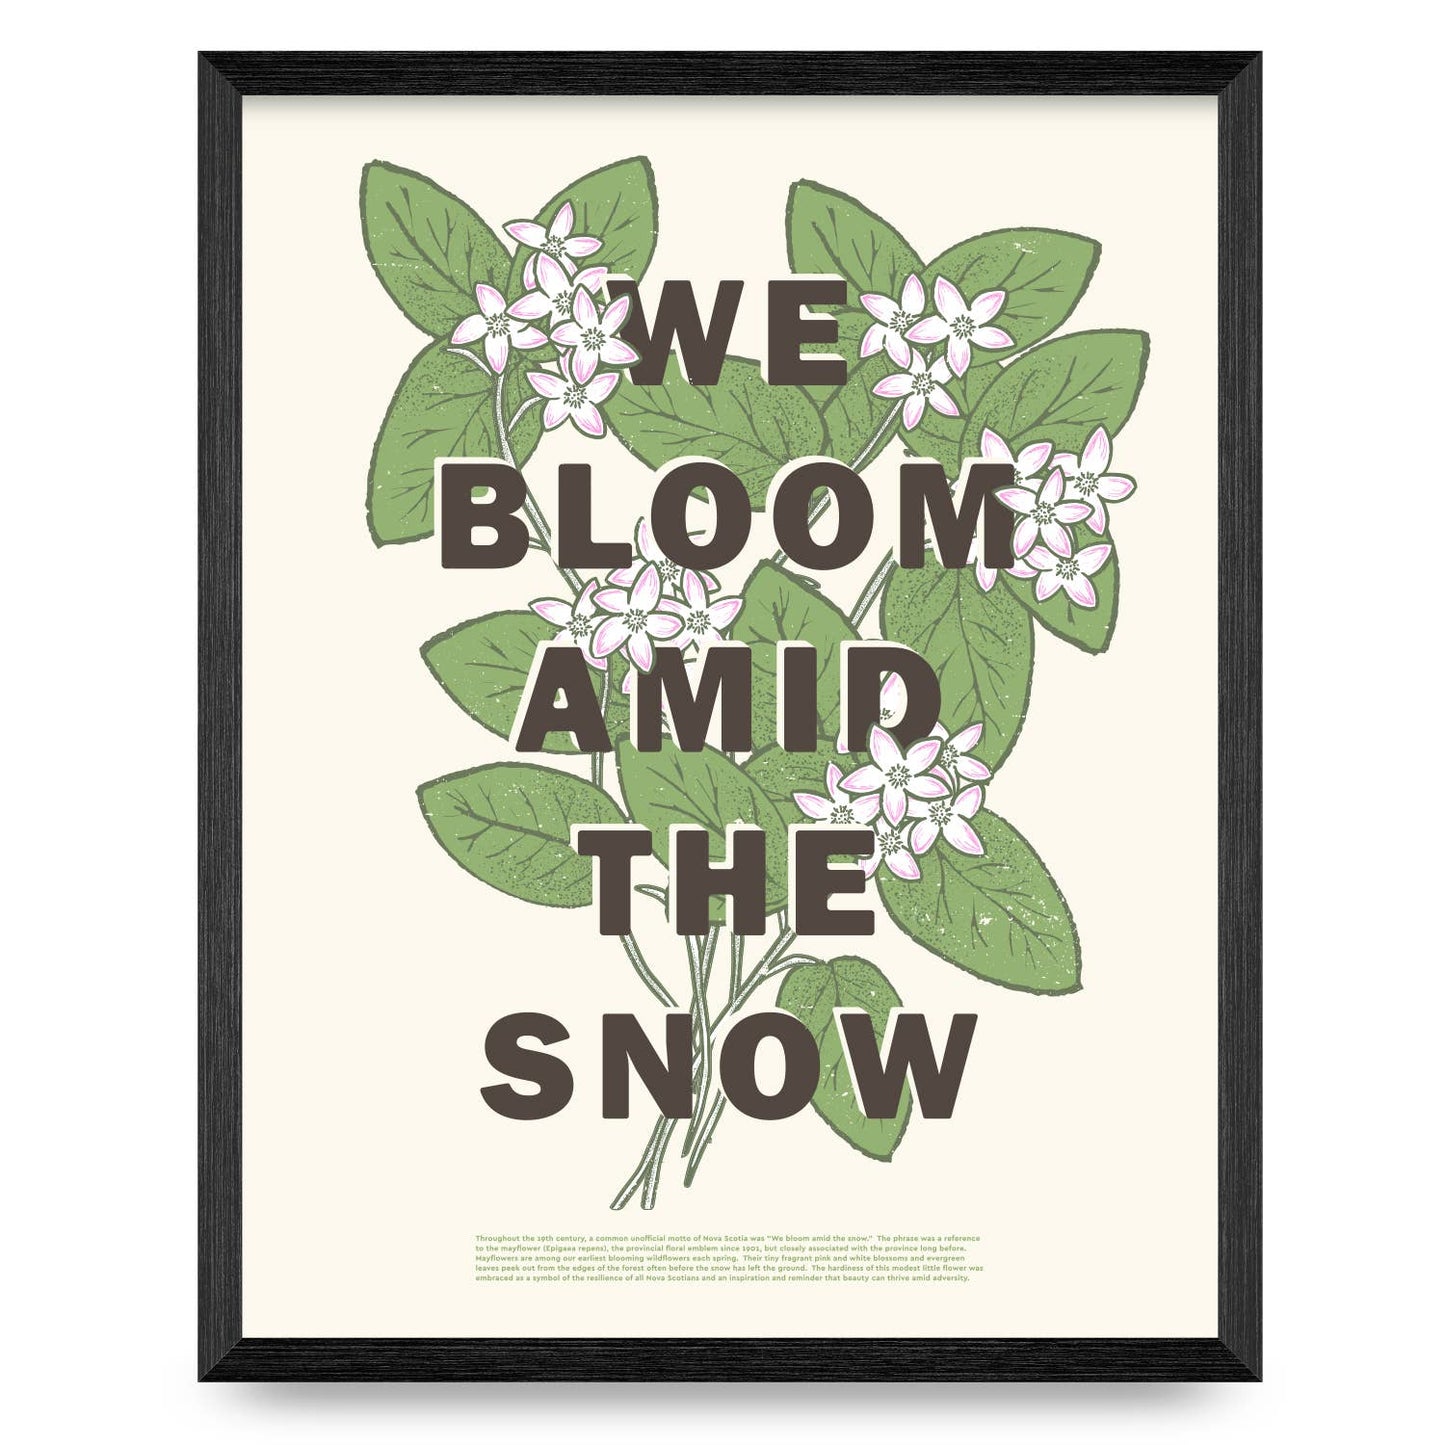 We Bloom Amid the Snow